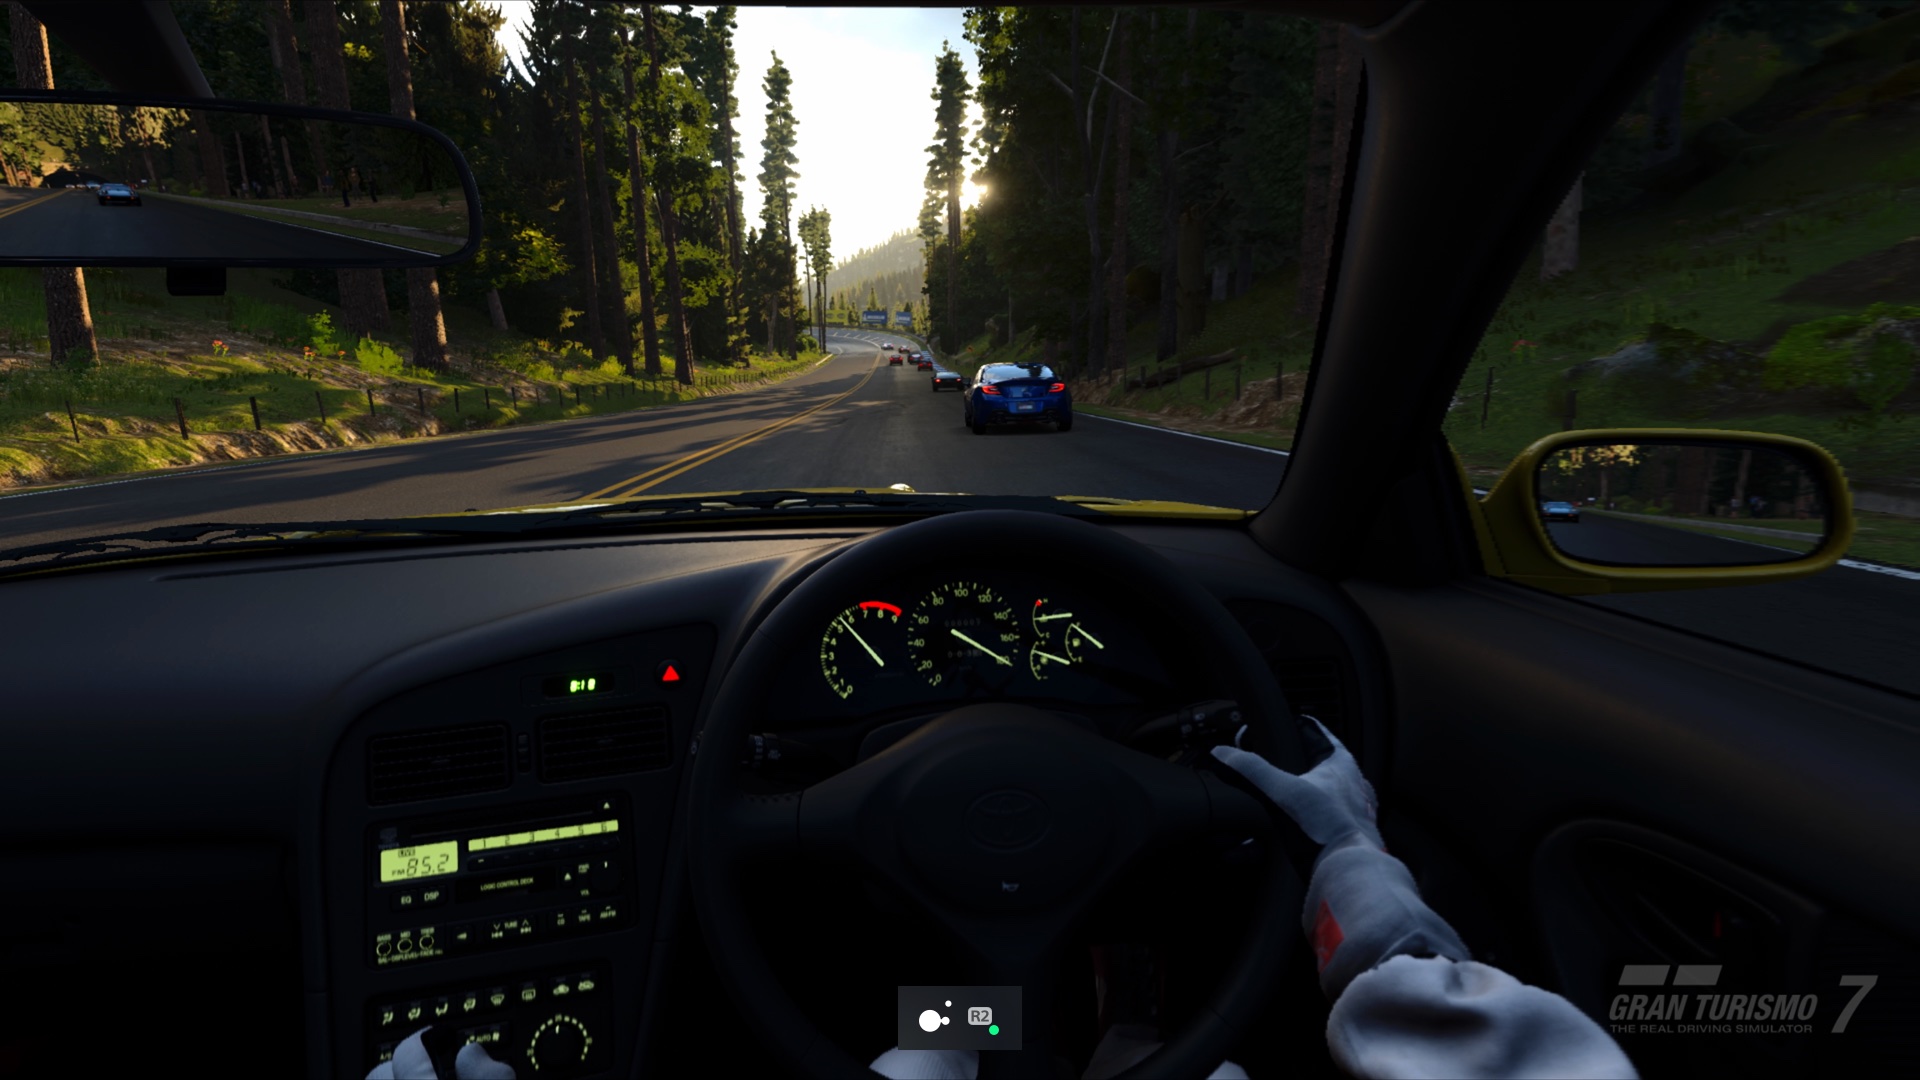  "Screenshot of PS5 Gran Turismo 7 showing toggle mode enabled for the 'R2' button on the access controller"